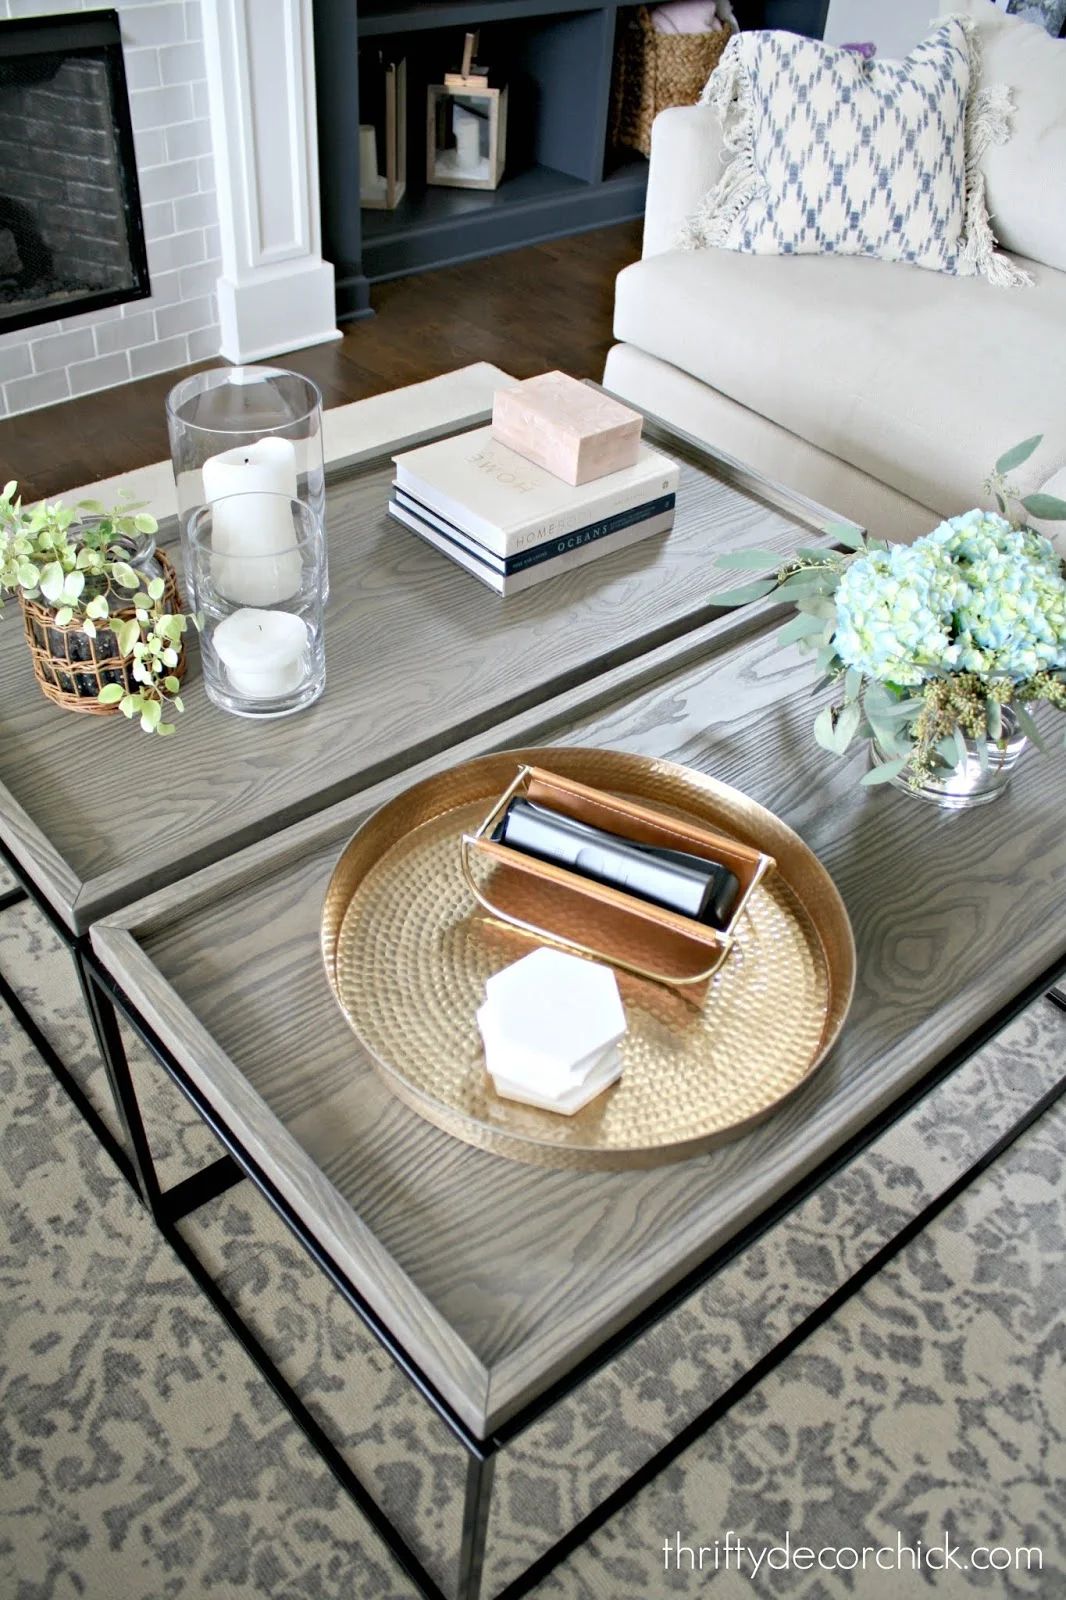 Diy Square {big!} Wood Coffee Table For Less | Thrifty Decor Chick |  Thrifty Diy, Decor And Organizing In Rectangular Coffee Tables With Pedestal Bases (View 10 of 15)